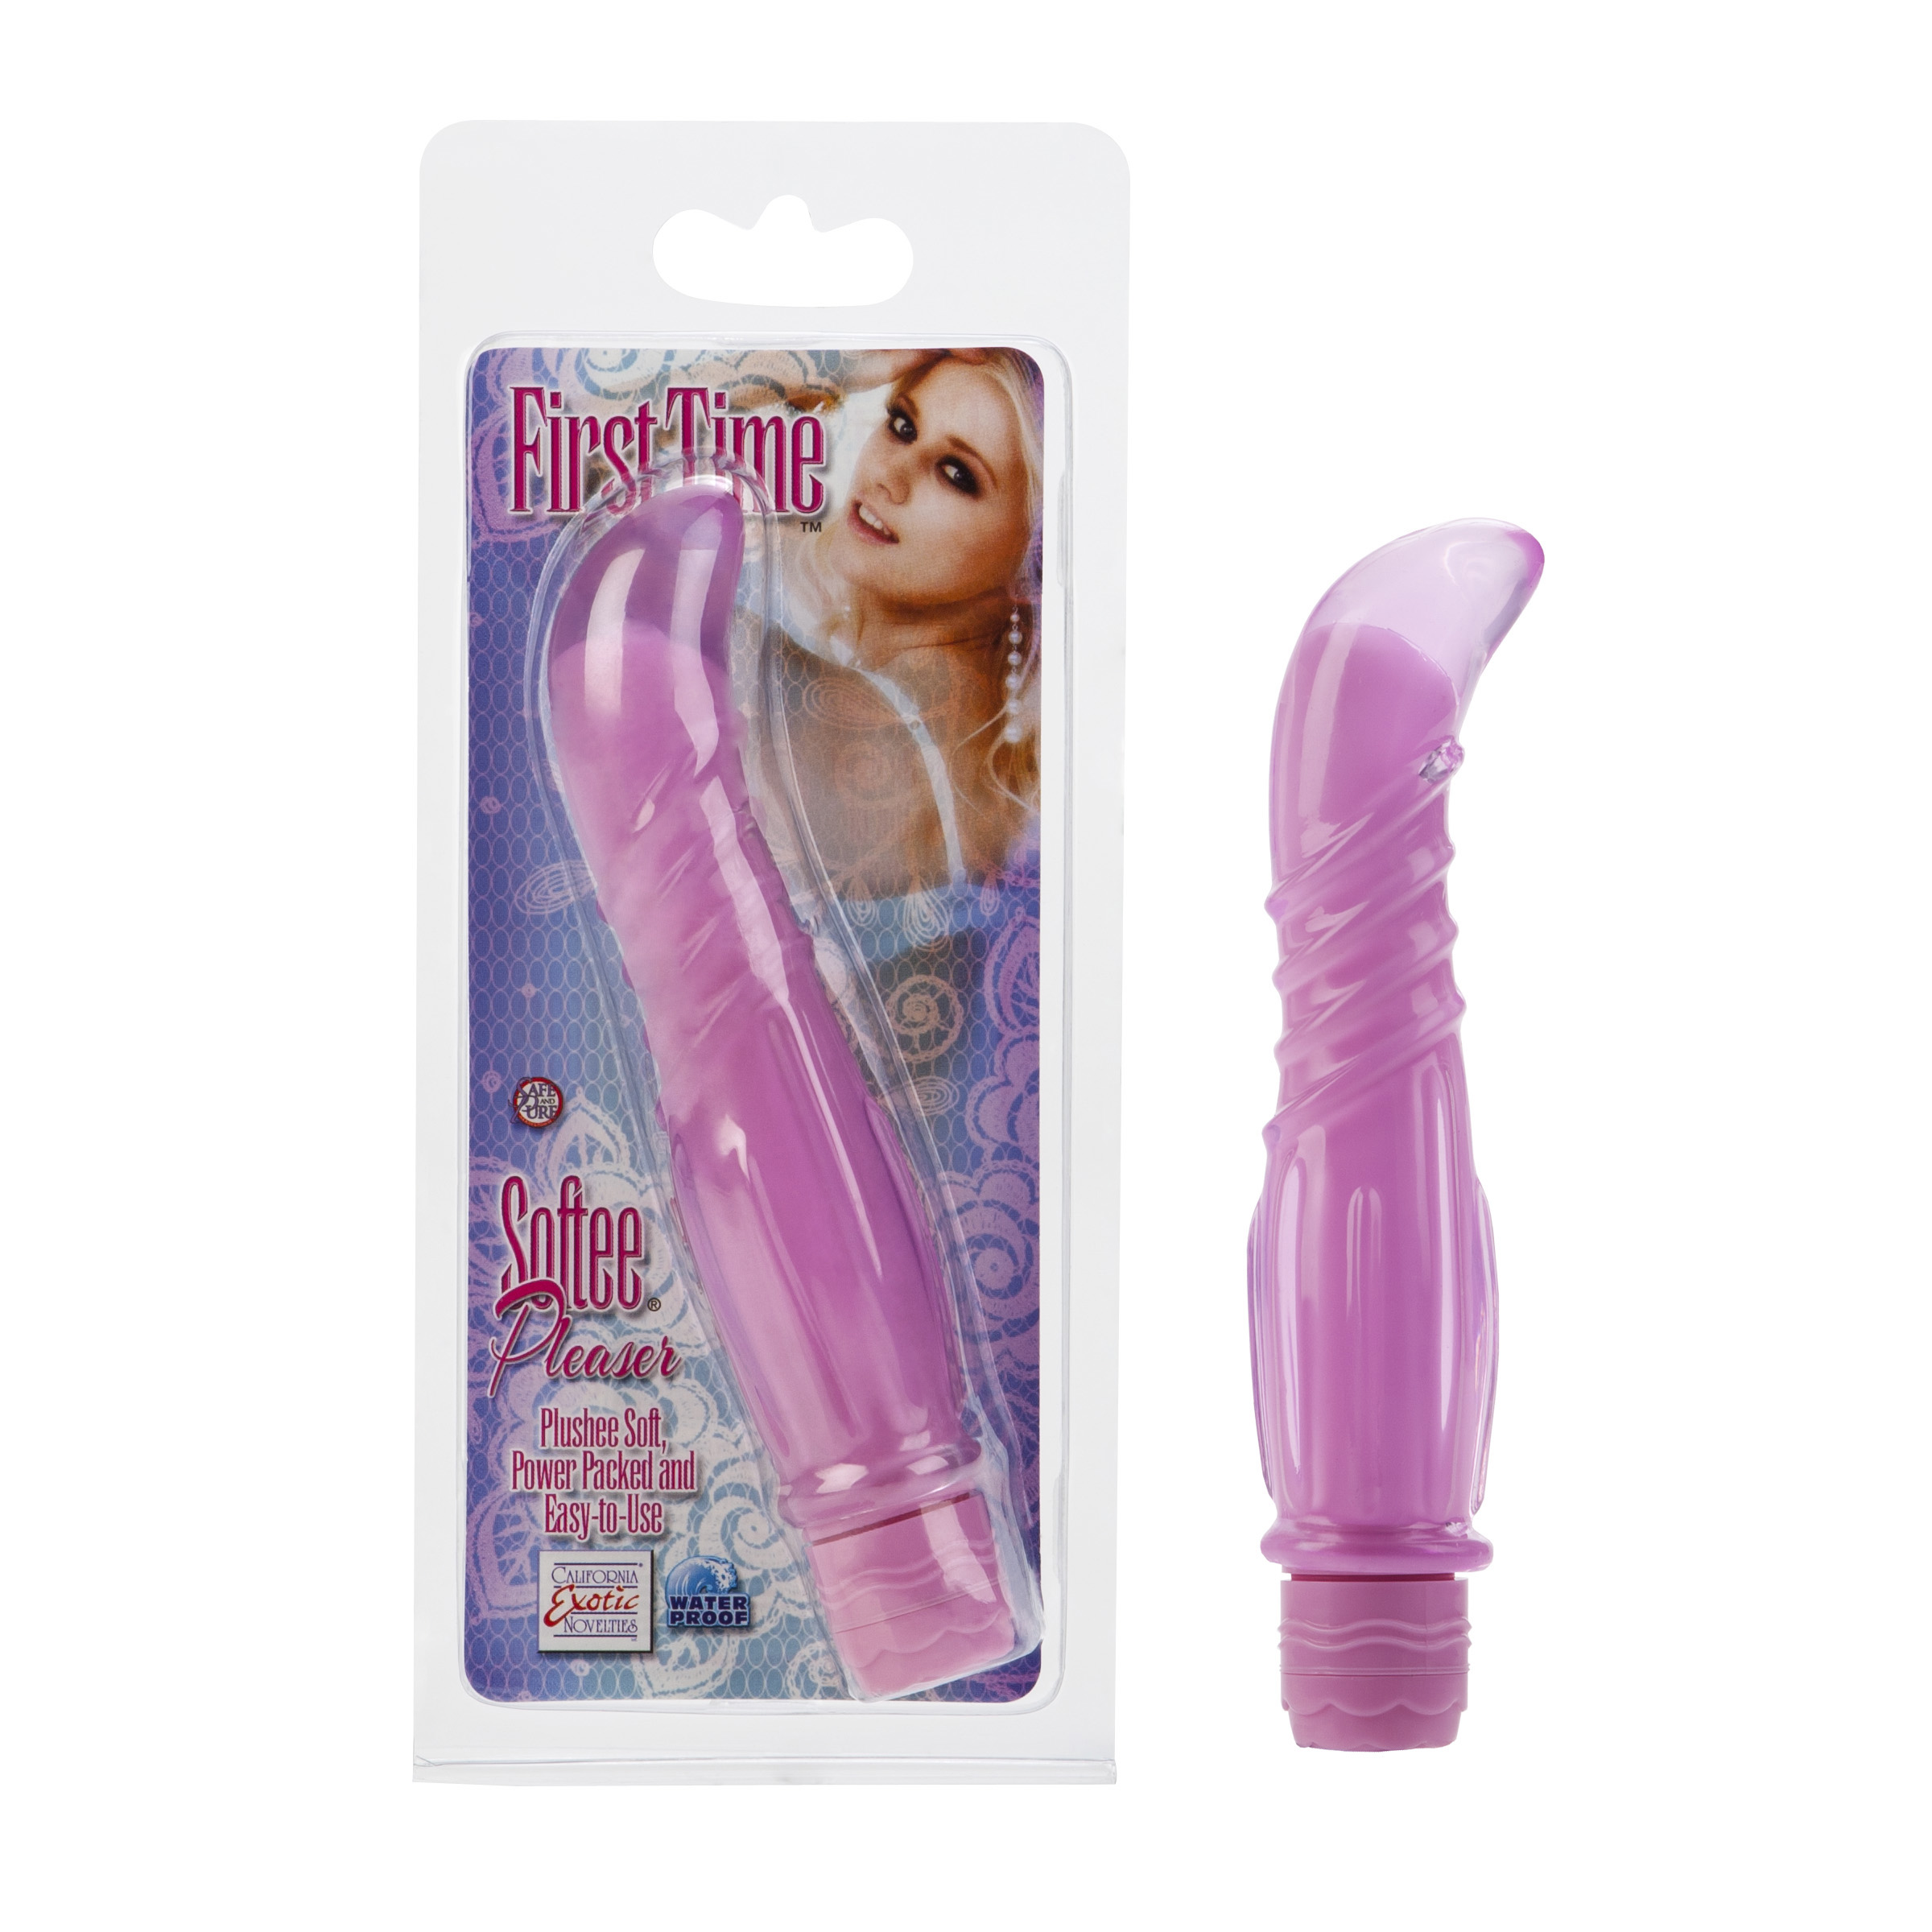 FIRST TIME SOFTEE PLEASER PINK 